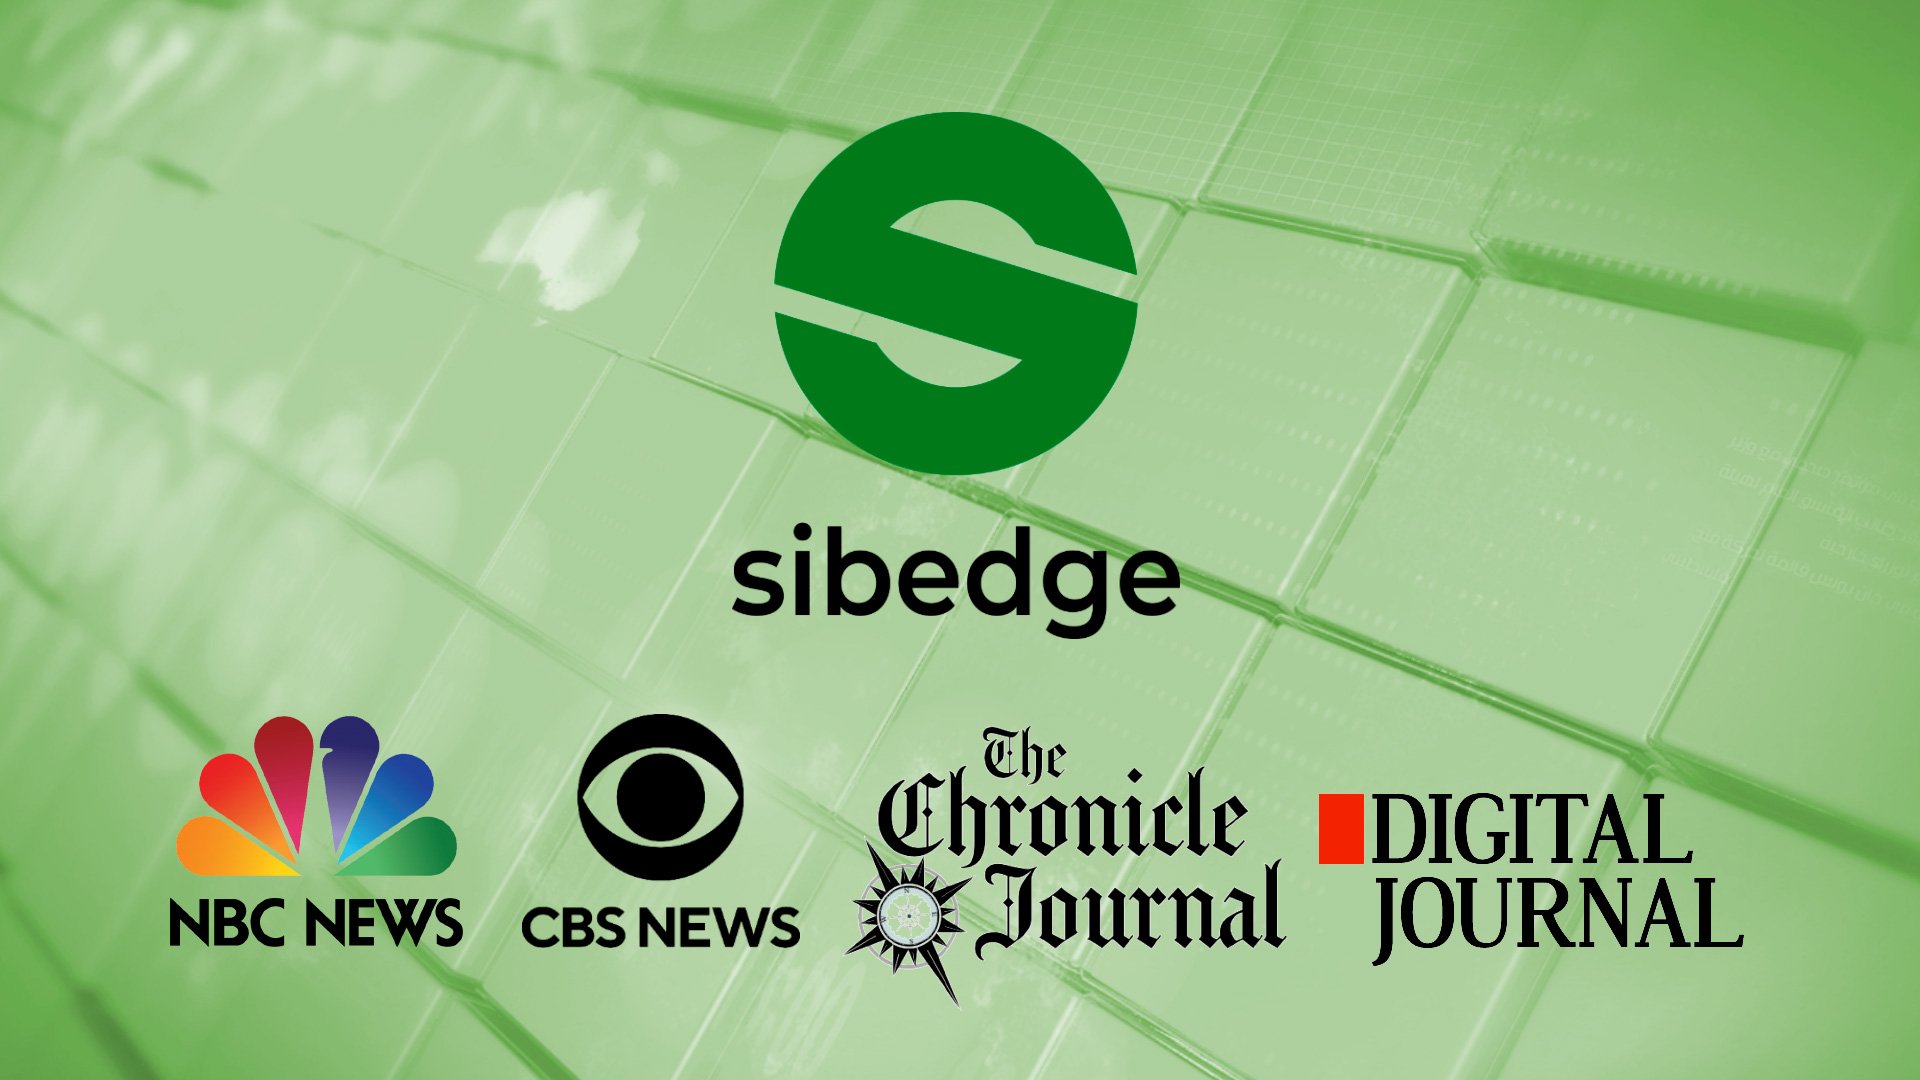 Sibedge architecture covered on NBC News